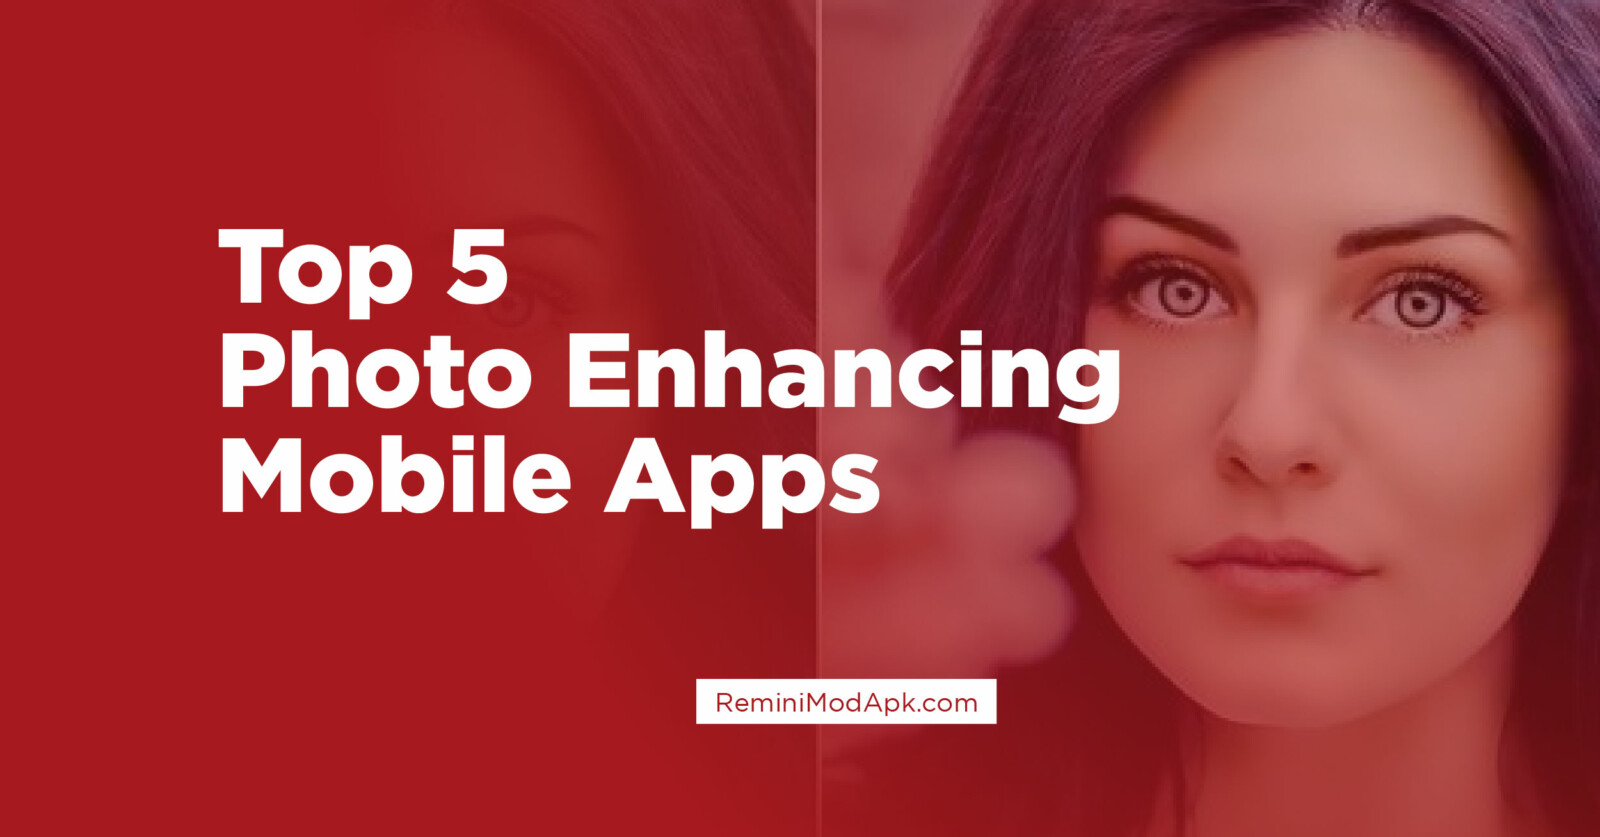 Top 5 Photo Enhancing Mobile Apps